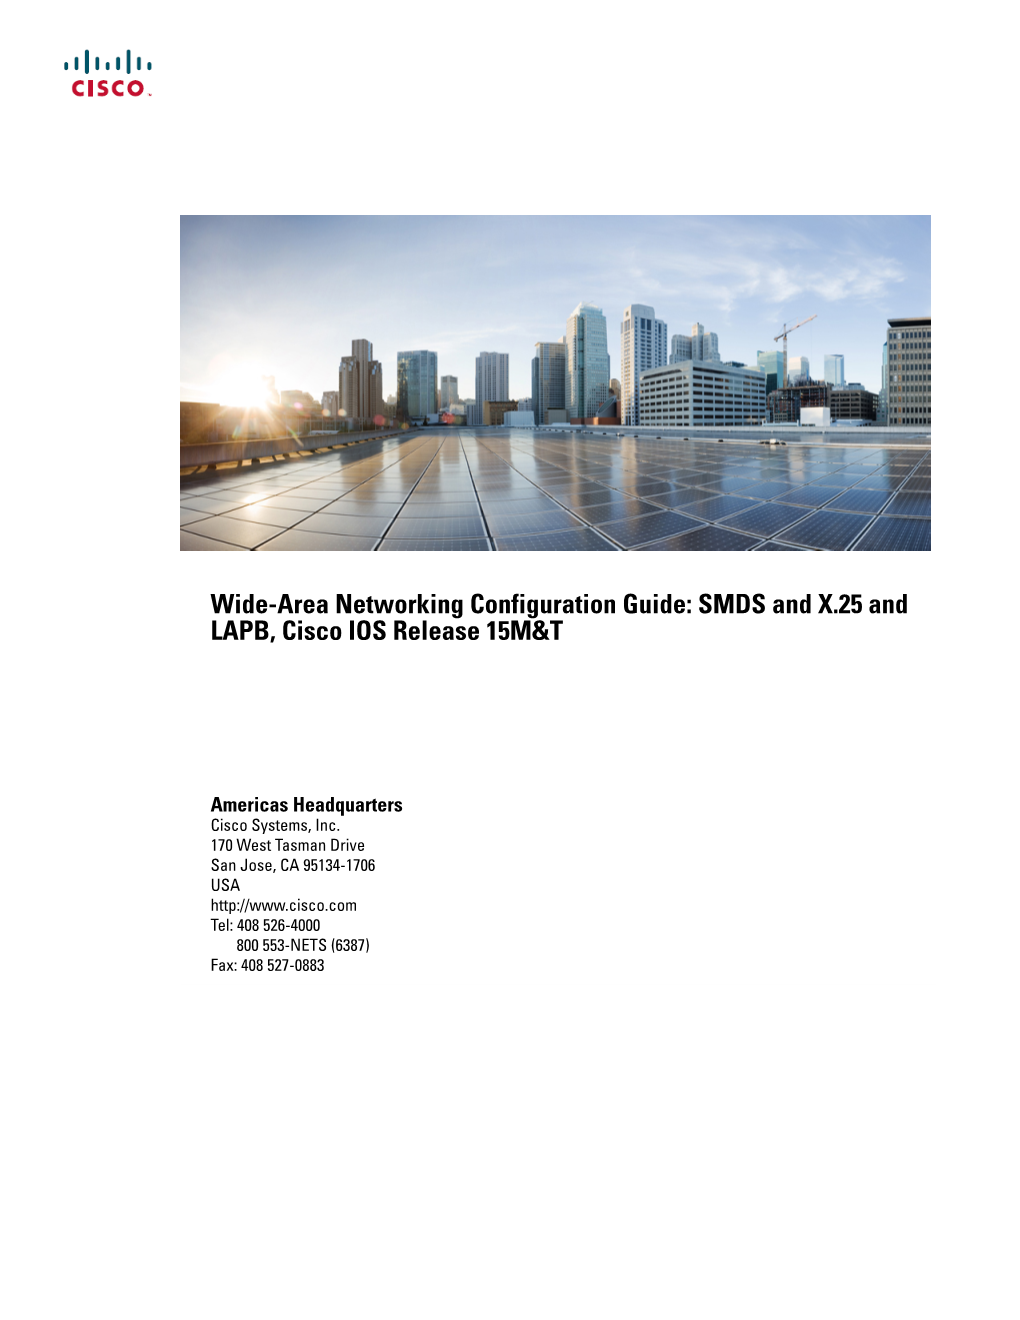 SMDS and X.25 and LAPB, Cisco IOS Release 15M&T